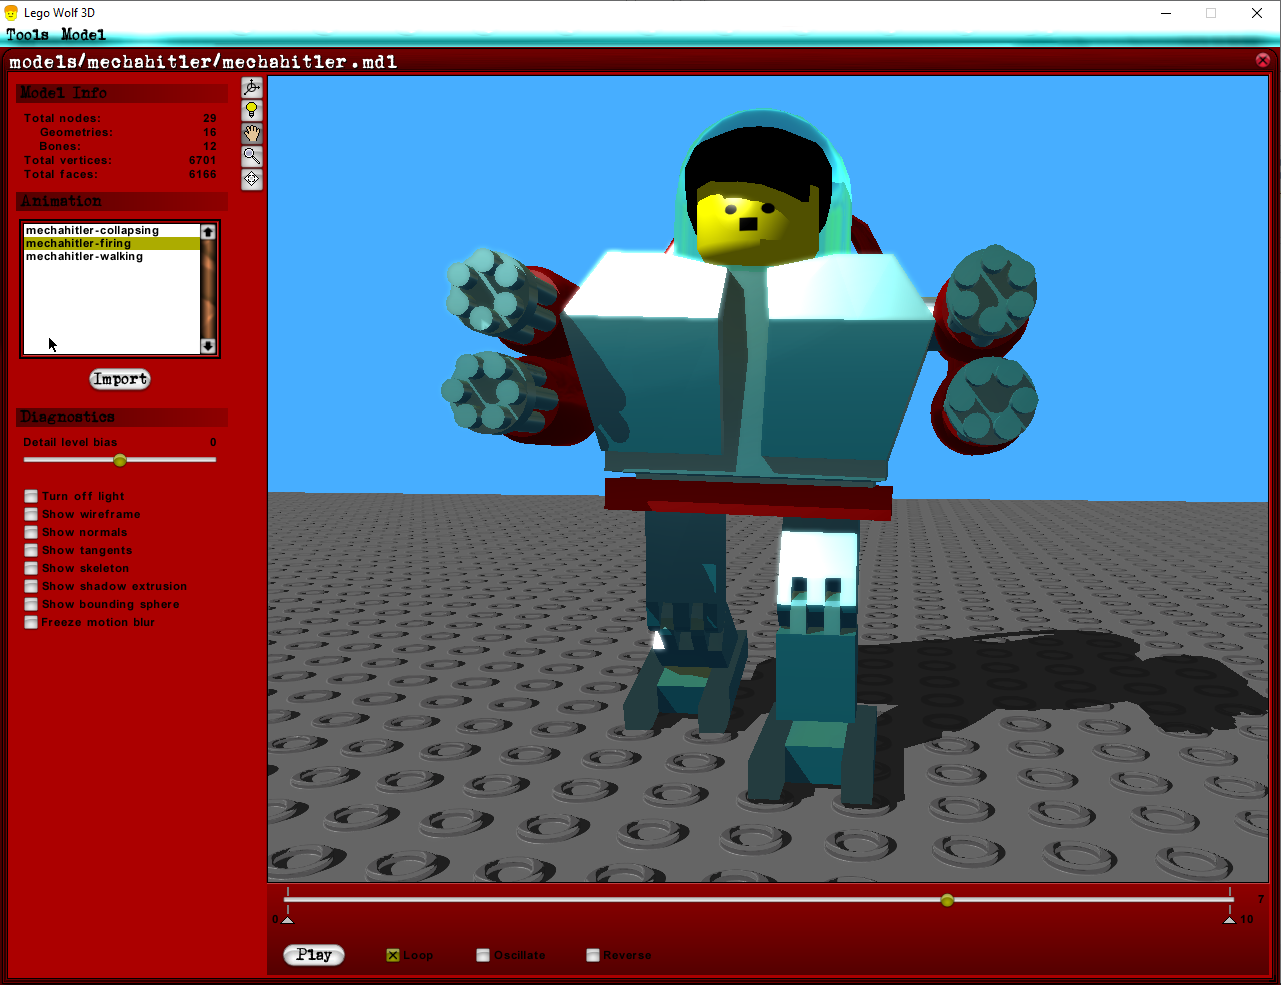 Viewing Mecha Hitler in the model viewer